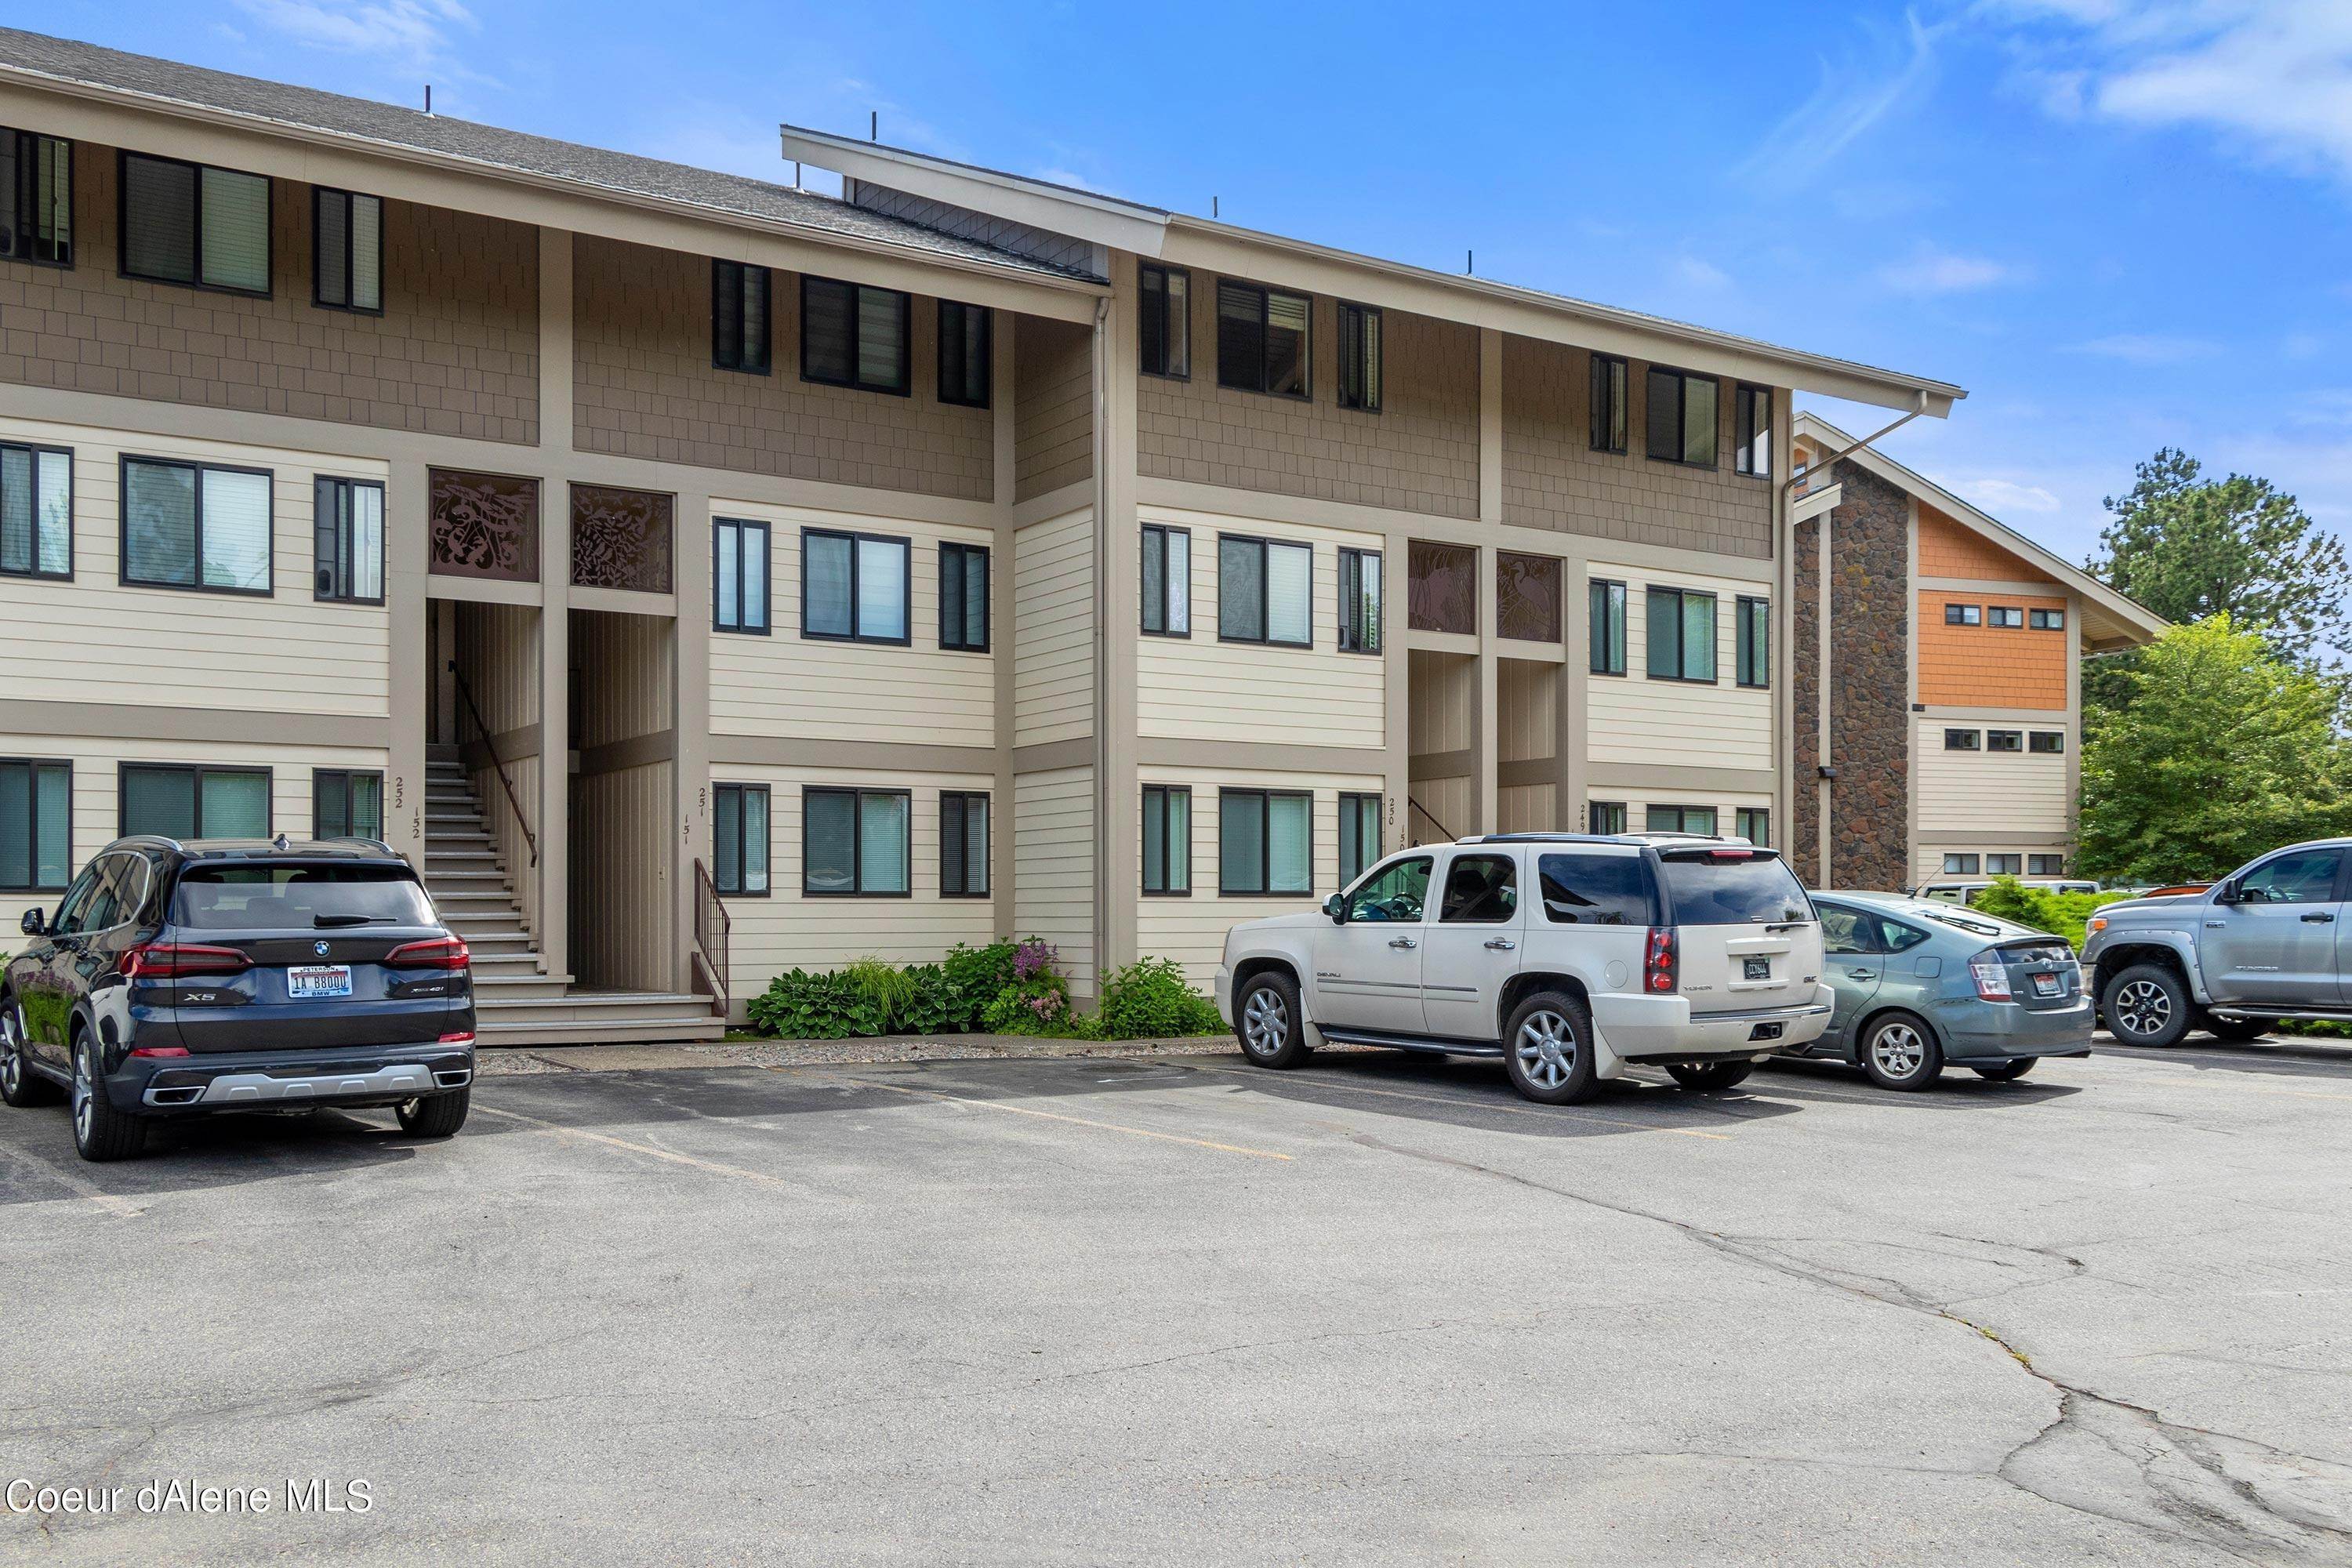 41. Condominiums for Sale at 301 Iberian Wy Sandpoint, Idaho 83864 United States